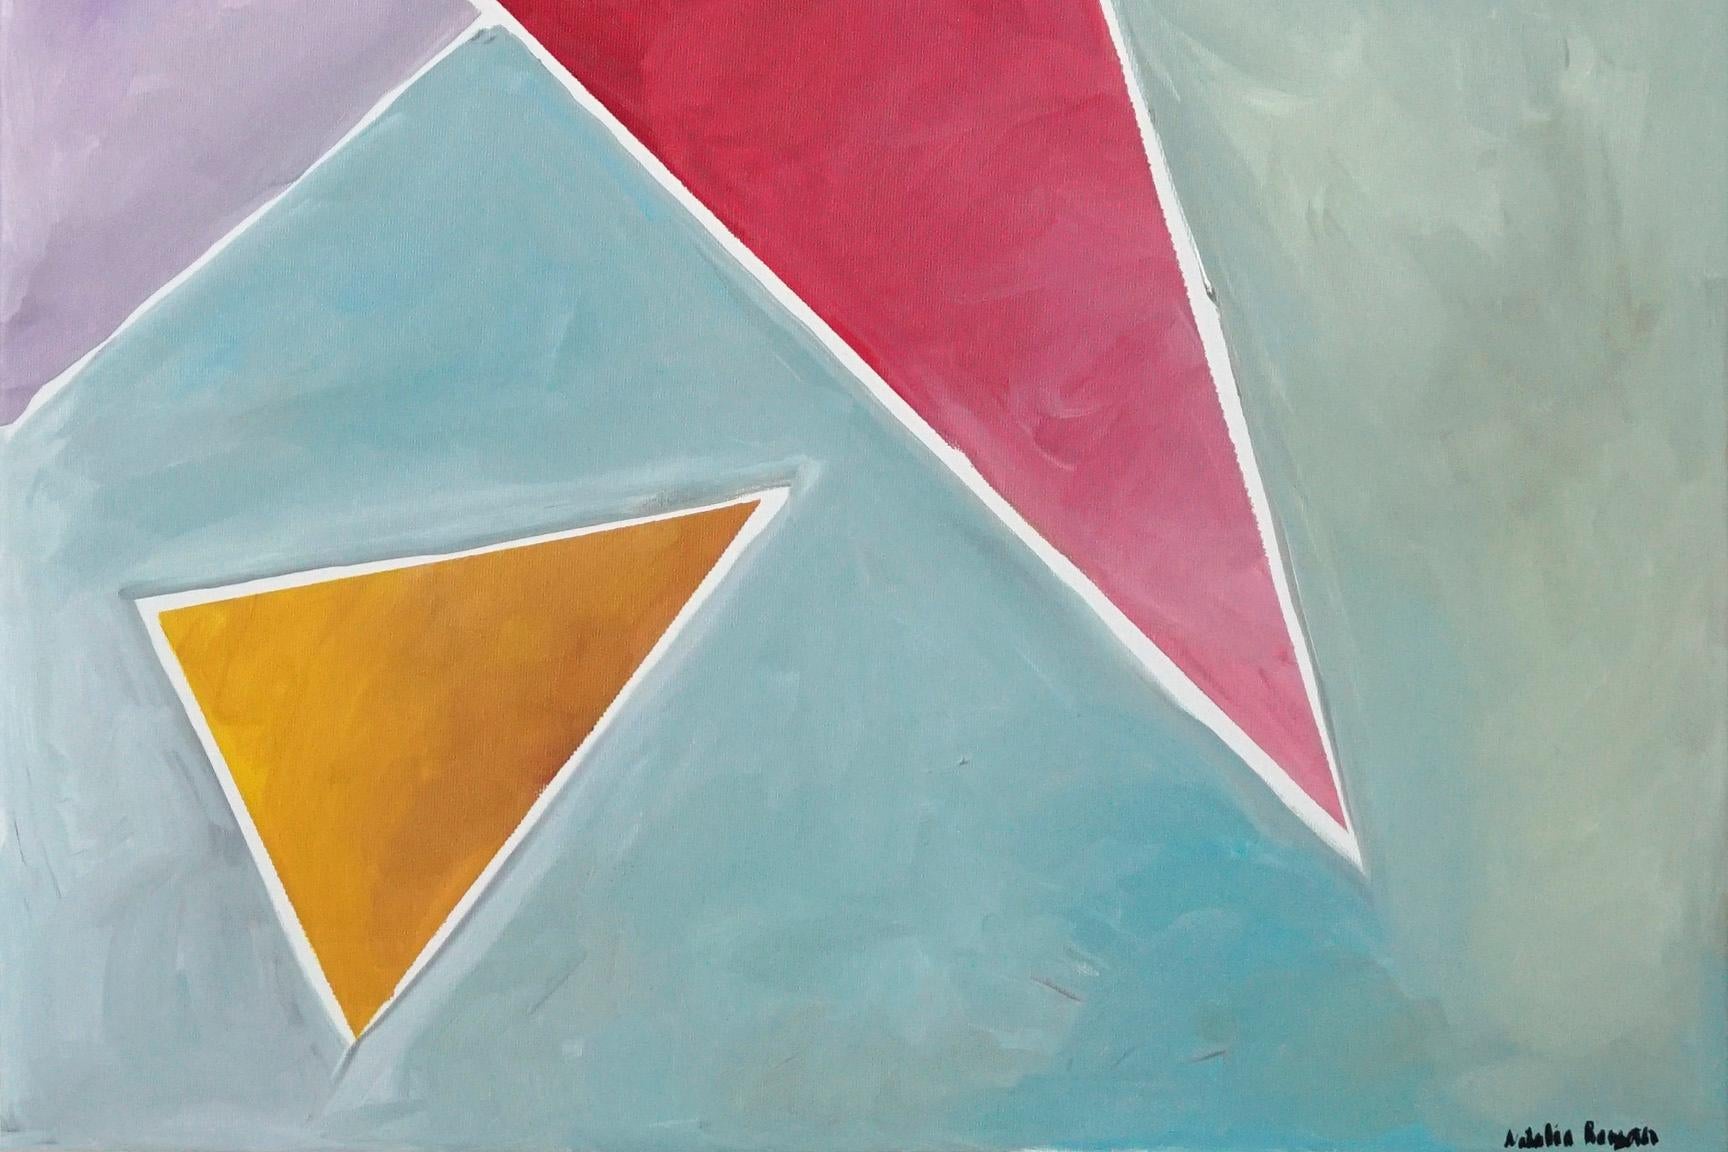 Diagonal Triangle Dream, Abstract Geometric Painting on Linen, Pastel Tones 2021 - Gray Abstract Painting by Natalia Roman